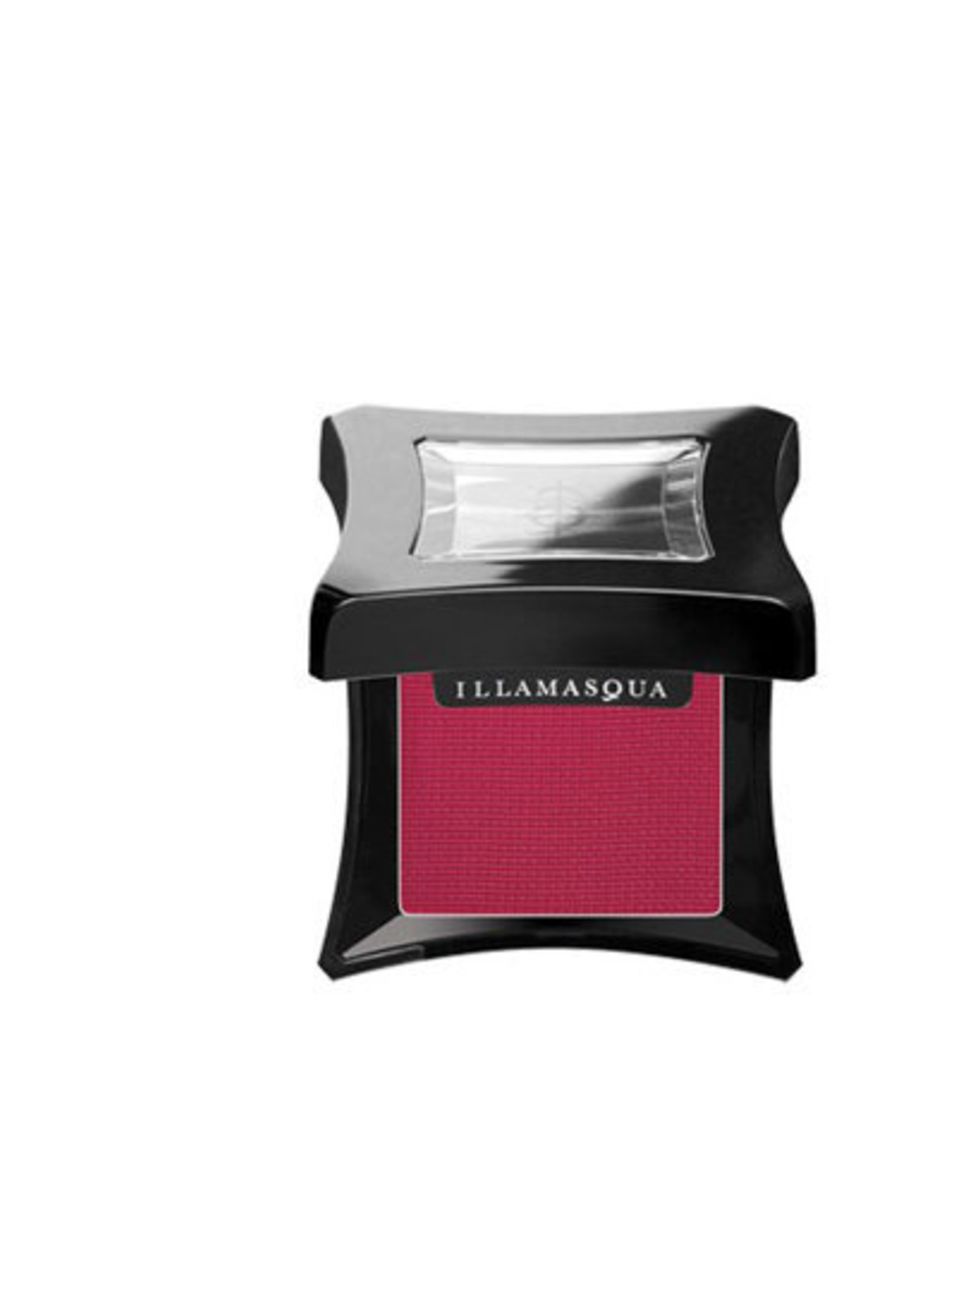 <p>With <a href="http://www.illamasqua.com/shop/products/eyes/eye-shadows/powder-eye-shadows/daemon-powder-eye-shadow">Illamasqua</a> Powder Eye Shadow in Daemon, £15.50. And don't forget your black liquid liner...</p>